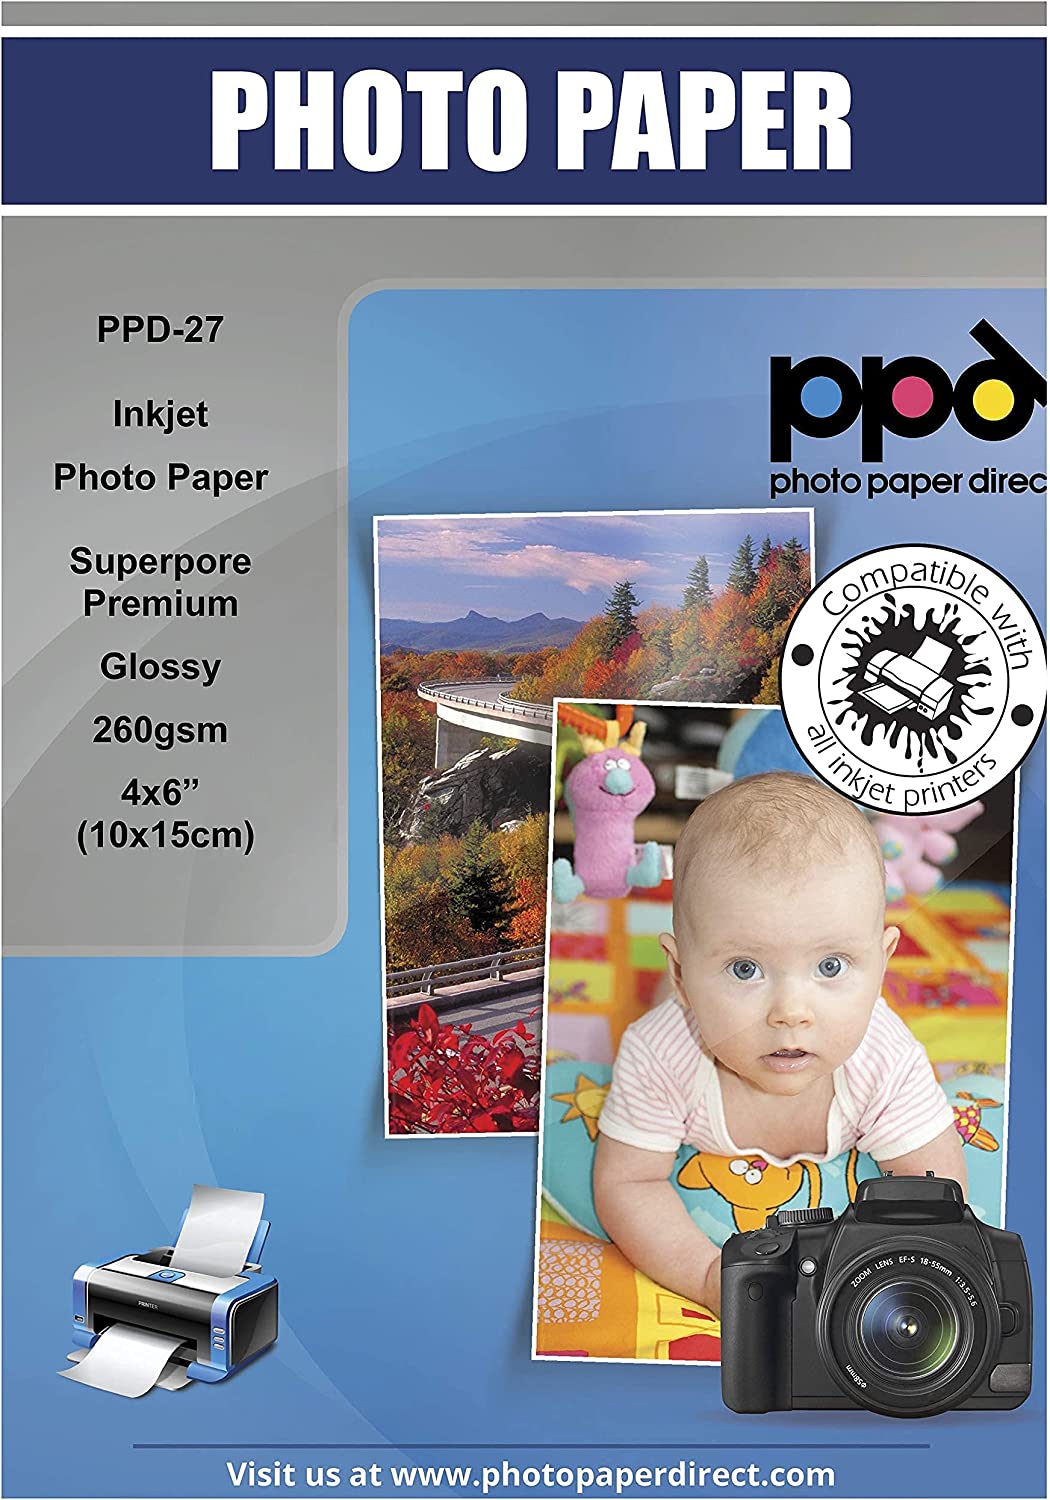 PPD Inkjet Heavyweight Photo Paper Glossy 64lb. 240gsm 10.9mil 11 x 14" PPD-27